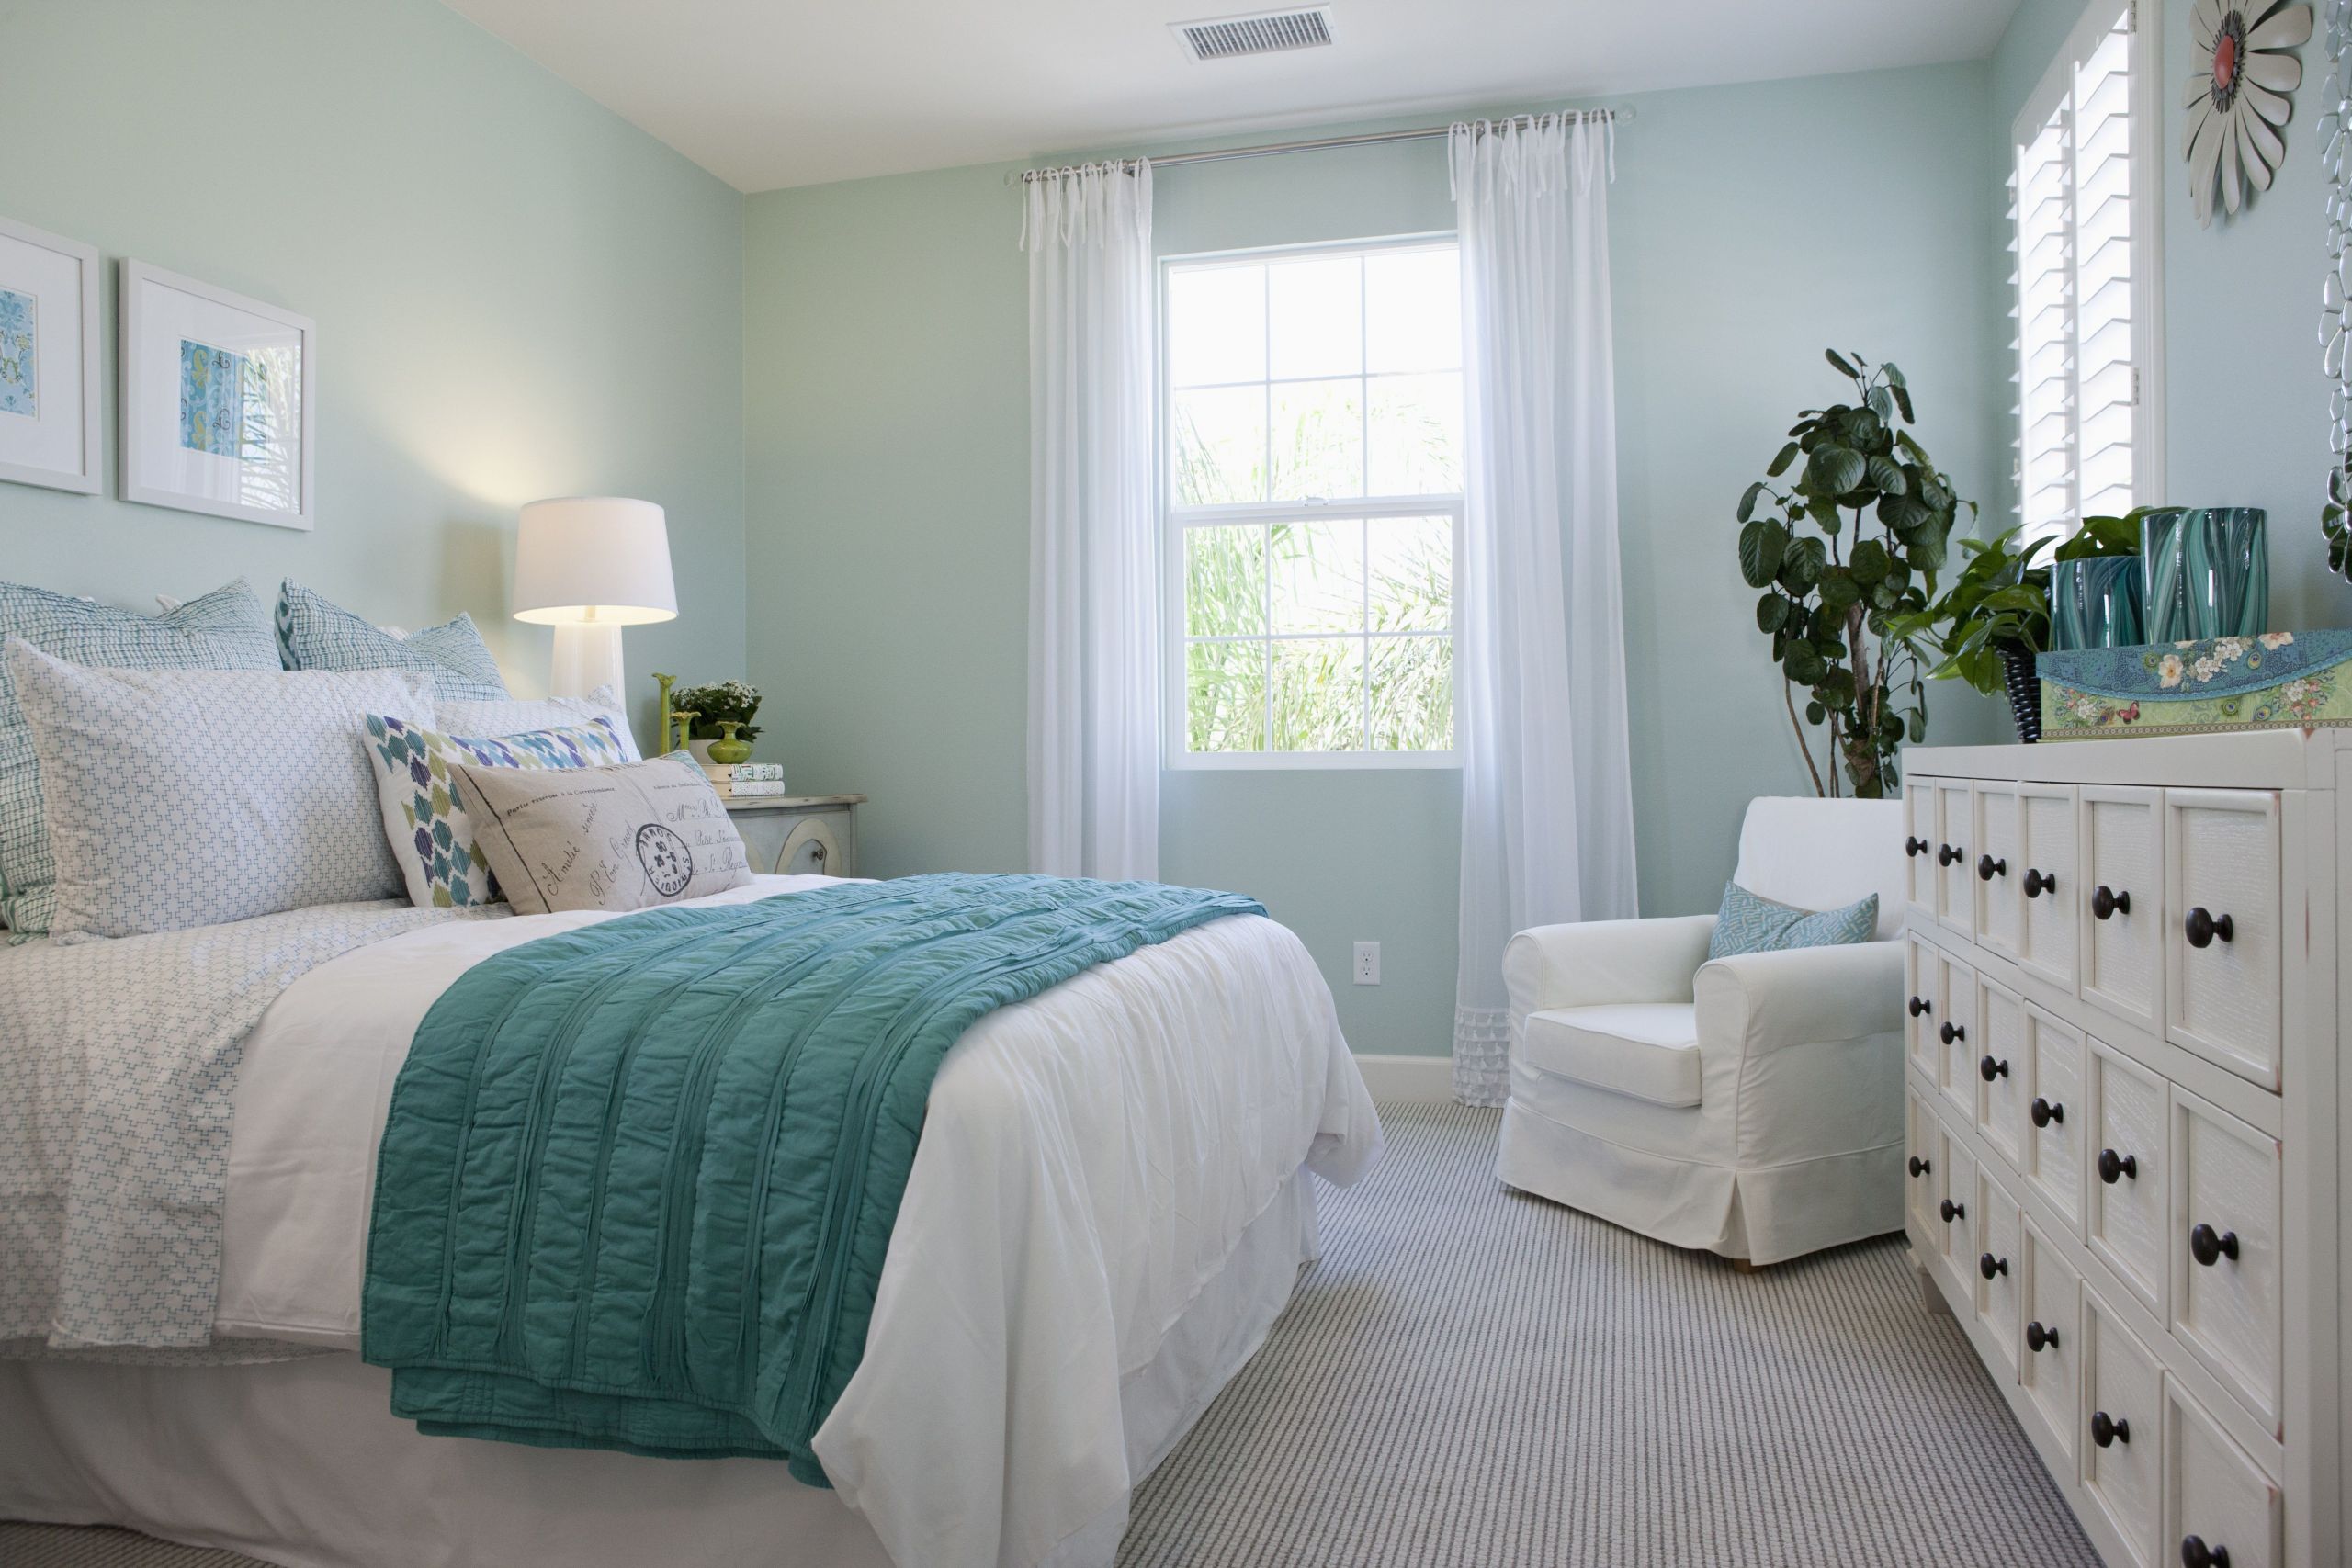 Modern Shabby Chic Bedrooms
 s and Tips for Decorating a Shabby Chic Bedroom